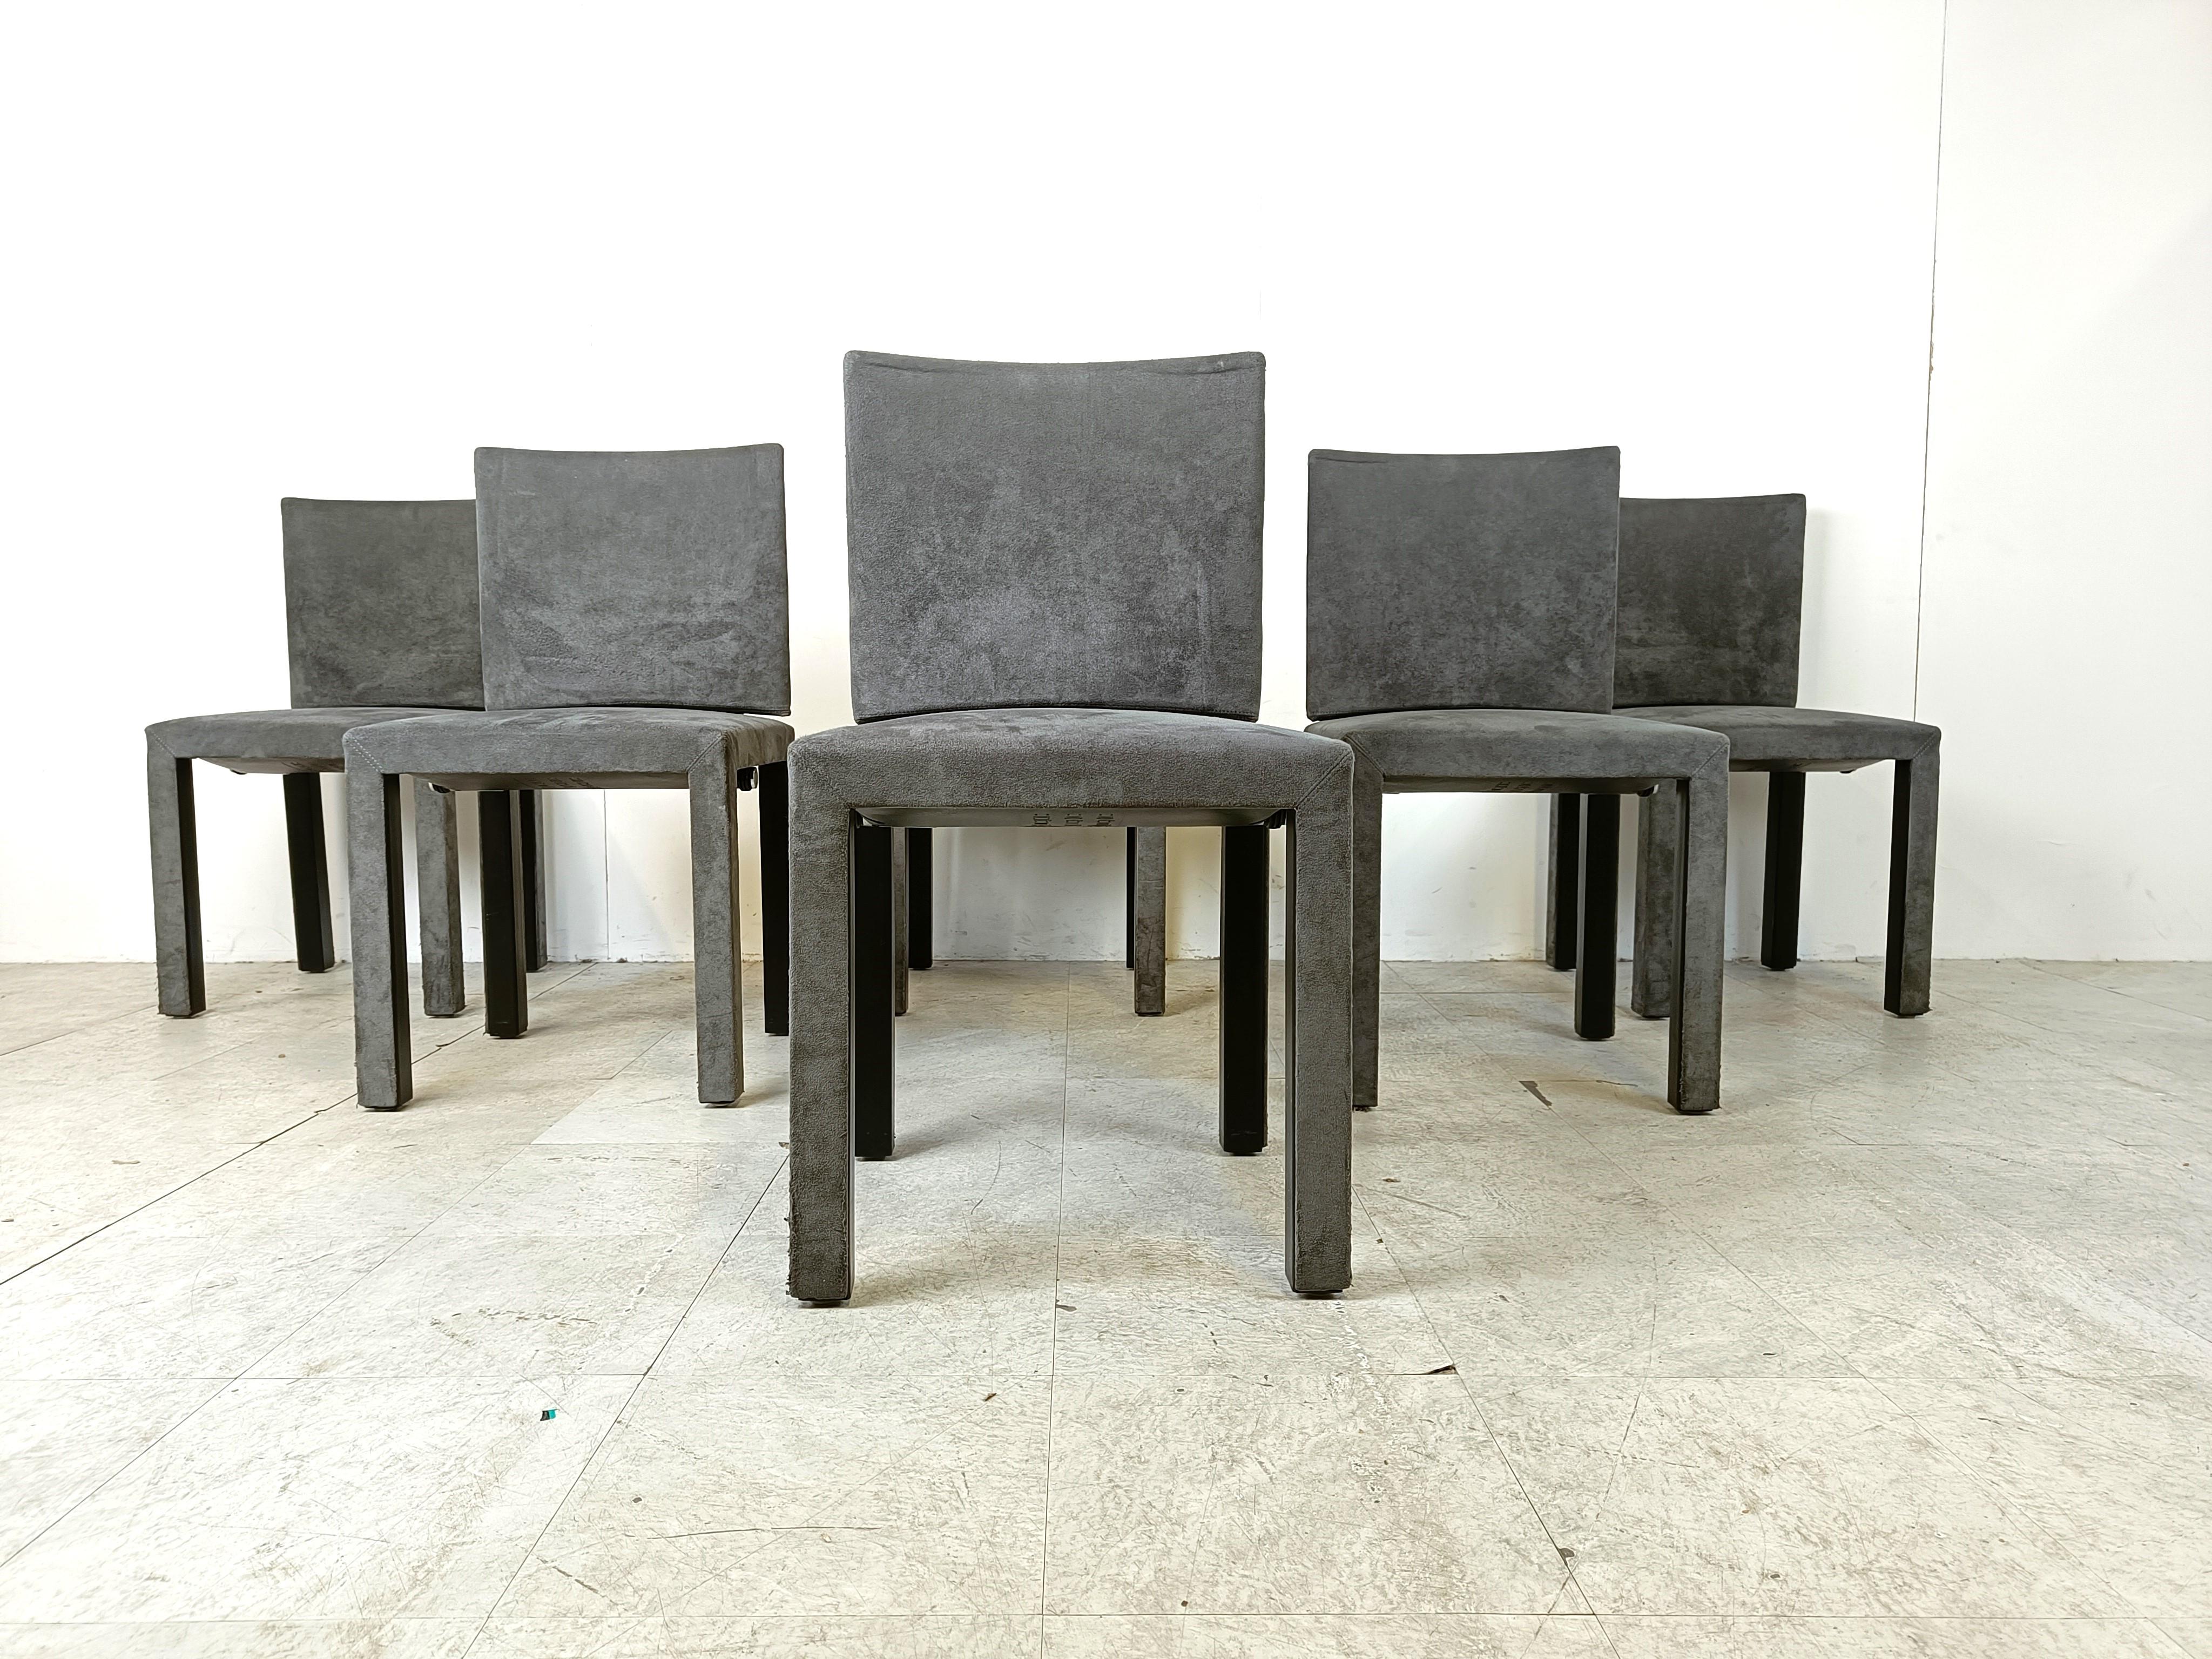 Italian Arcadia dining chairs by Paolo Piva for B& B Italia set of 6